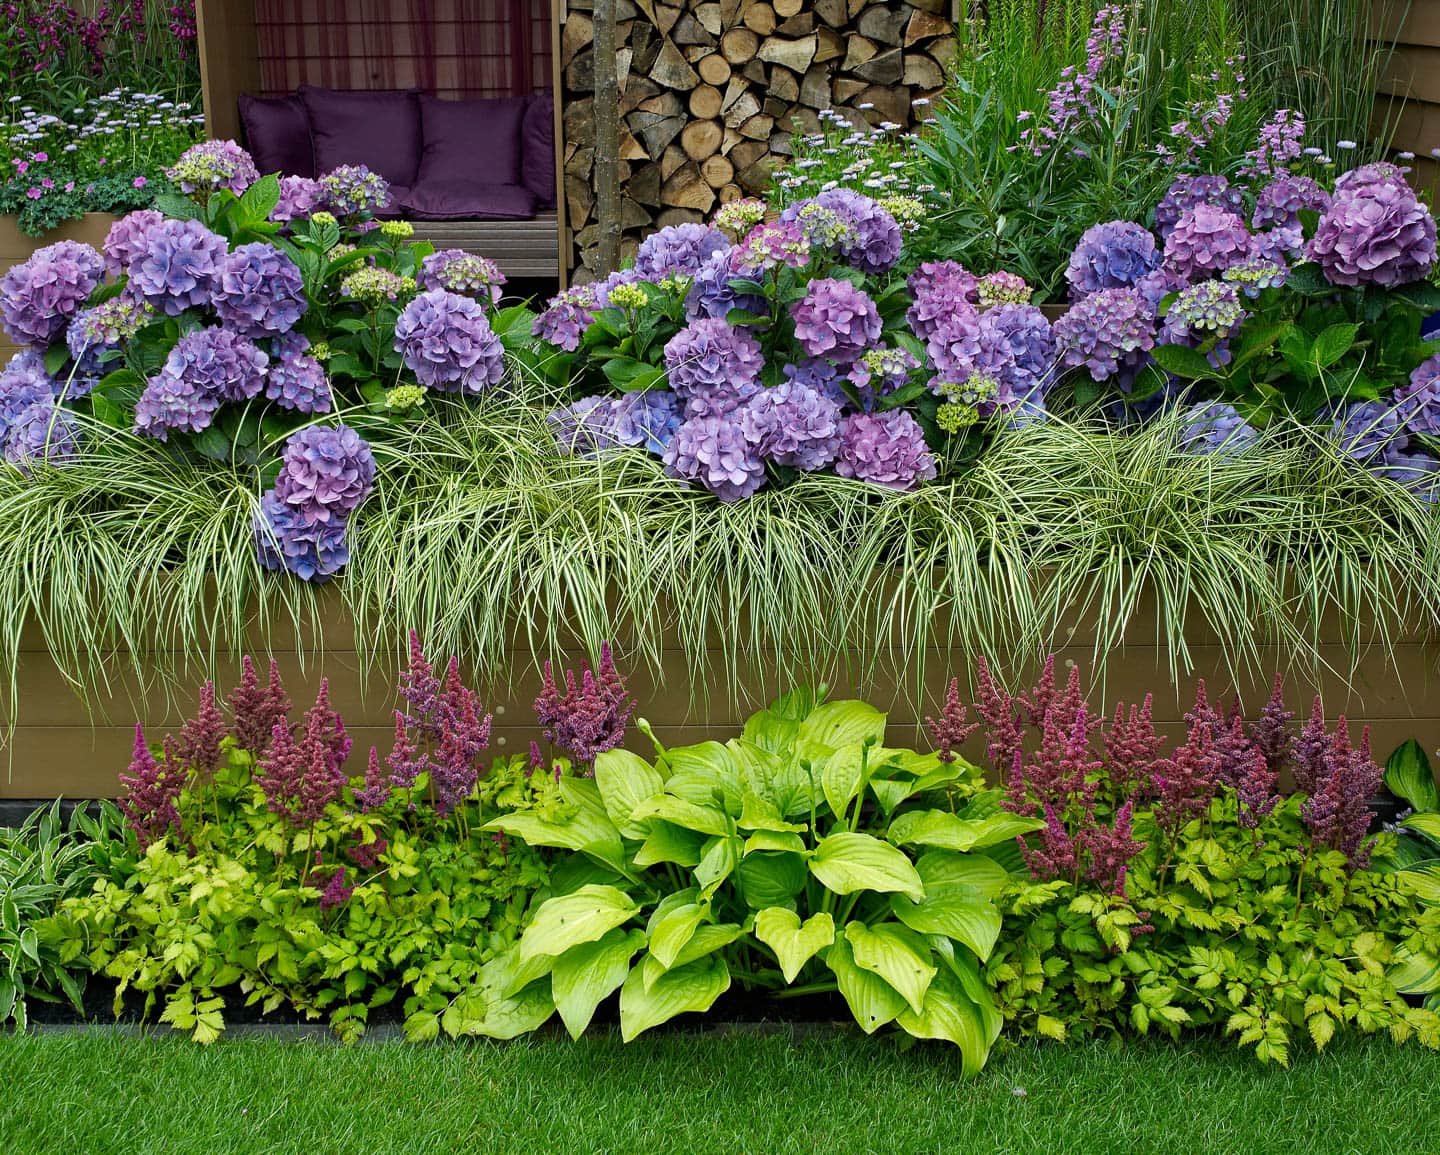 Hosta and Astilbe in front of a planter filled with blue Hydrangeas and Sedge 